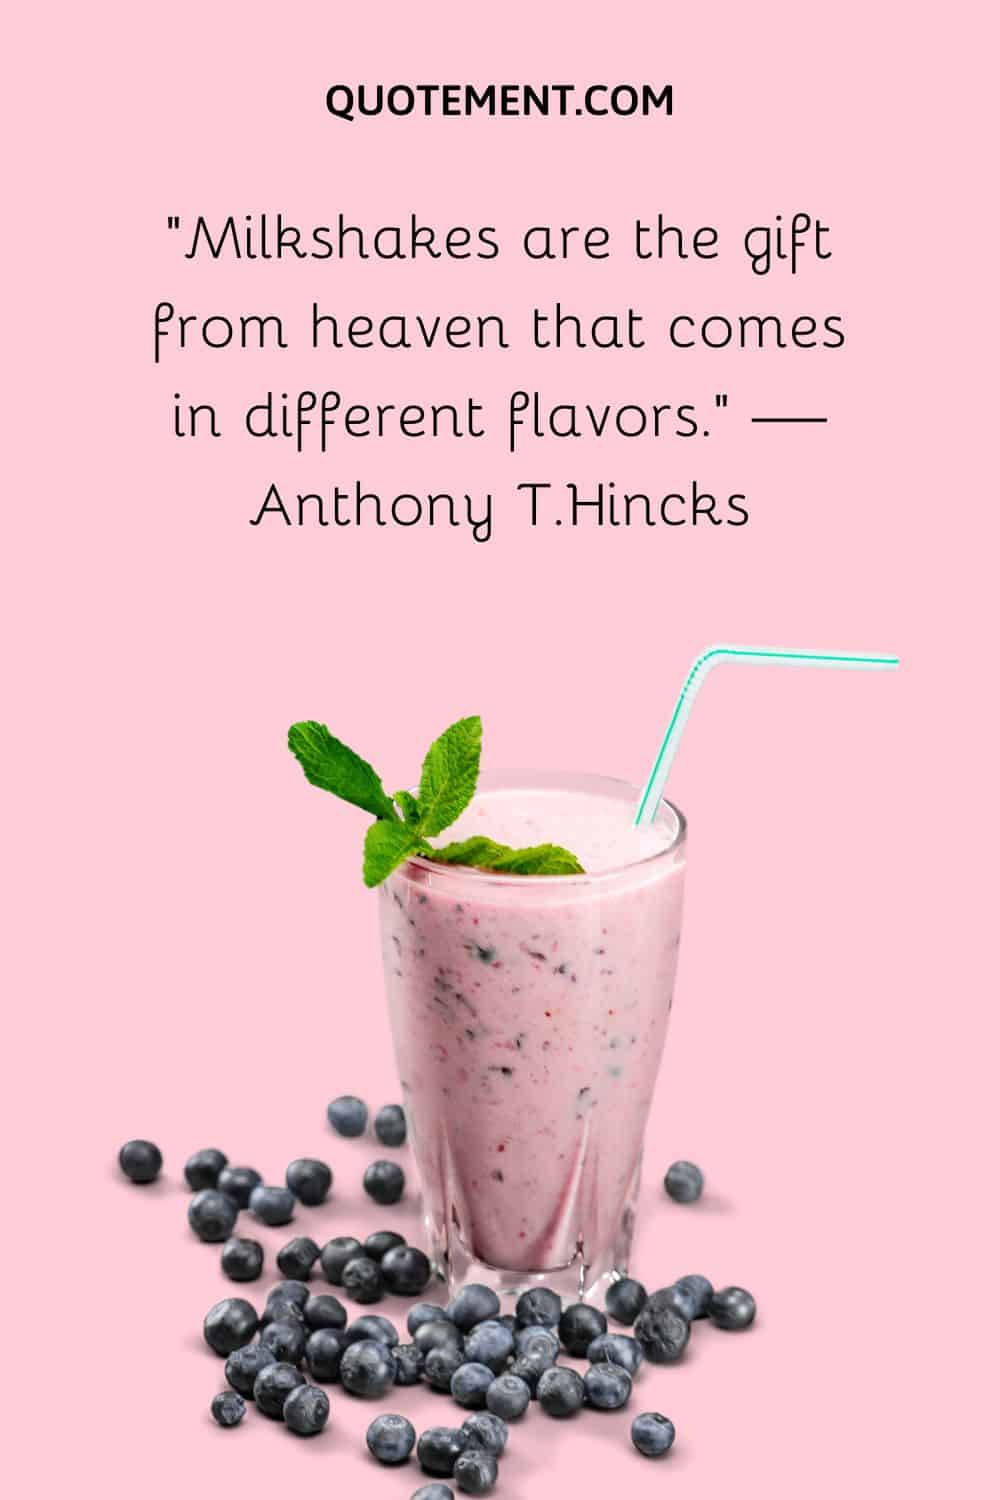 “Milkshakes are the gift from heaven that comes in different flavors.” — Anthony T.Hincks